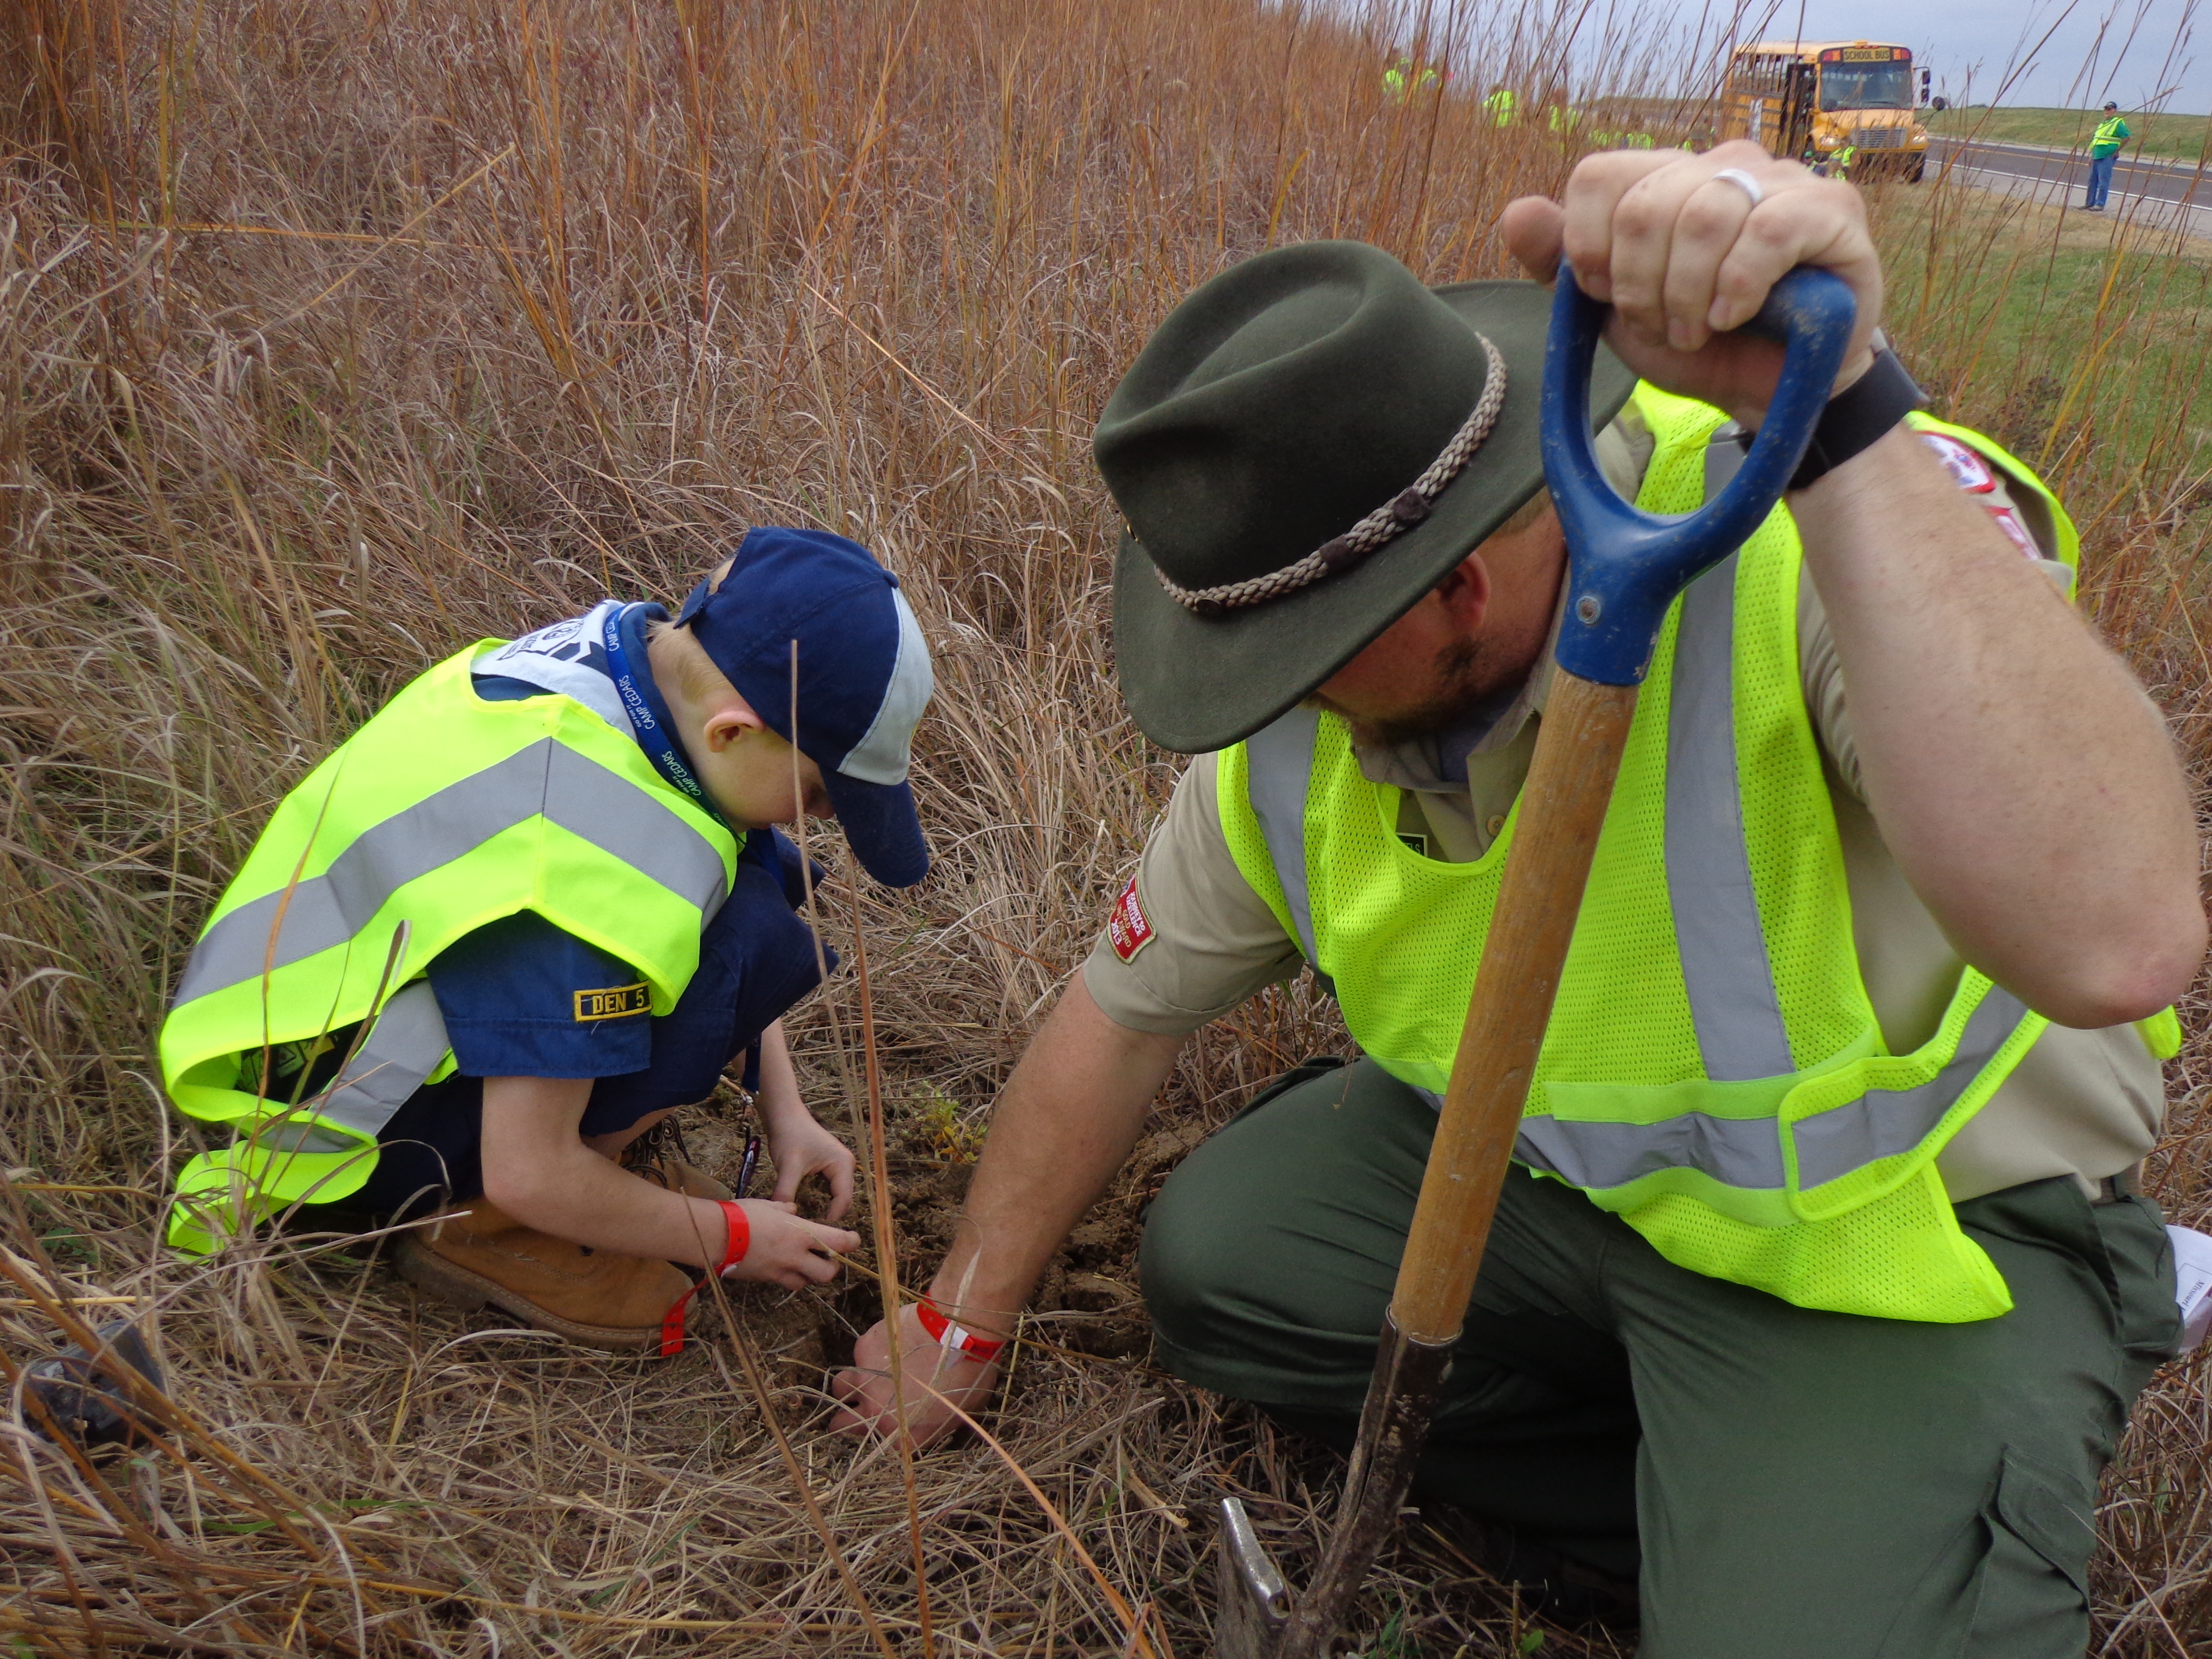 Boy Scout Jamboree participants planting milkweed seedlings on NDOR right-of-way. Courtesy of Mike Groenwald, NGPC.